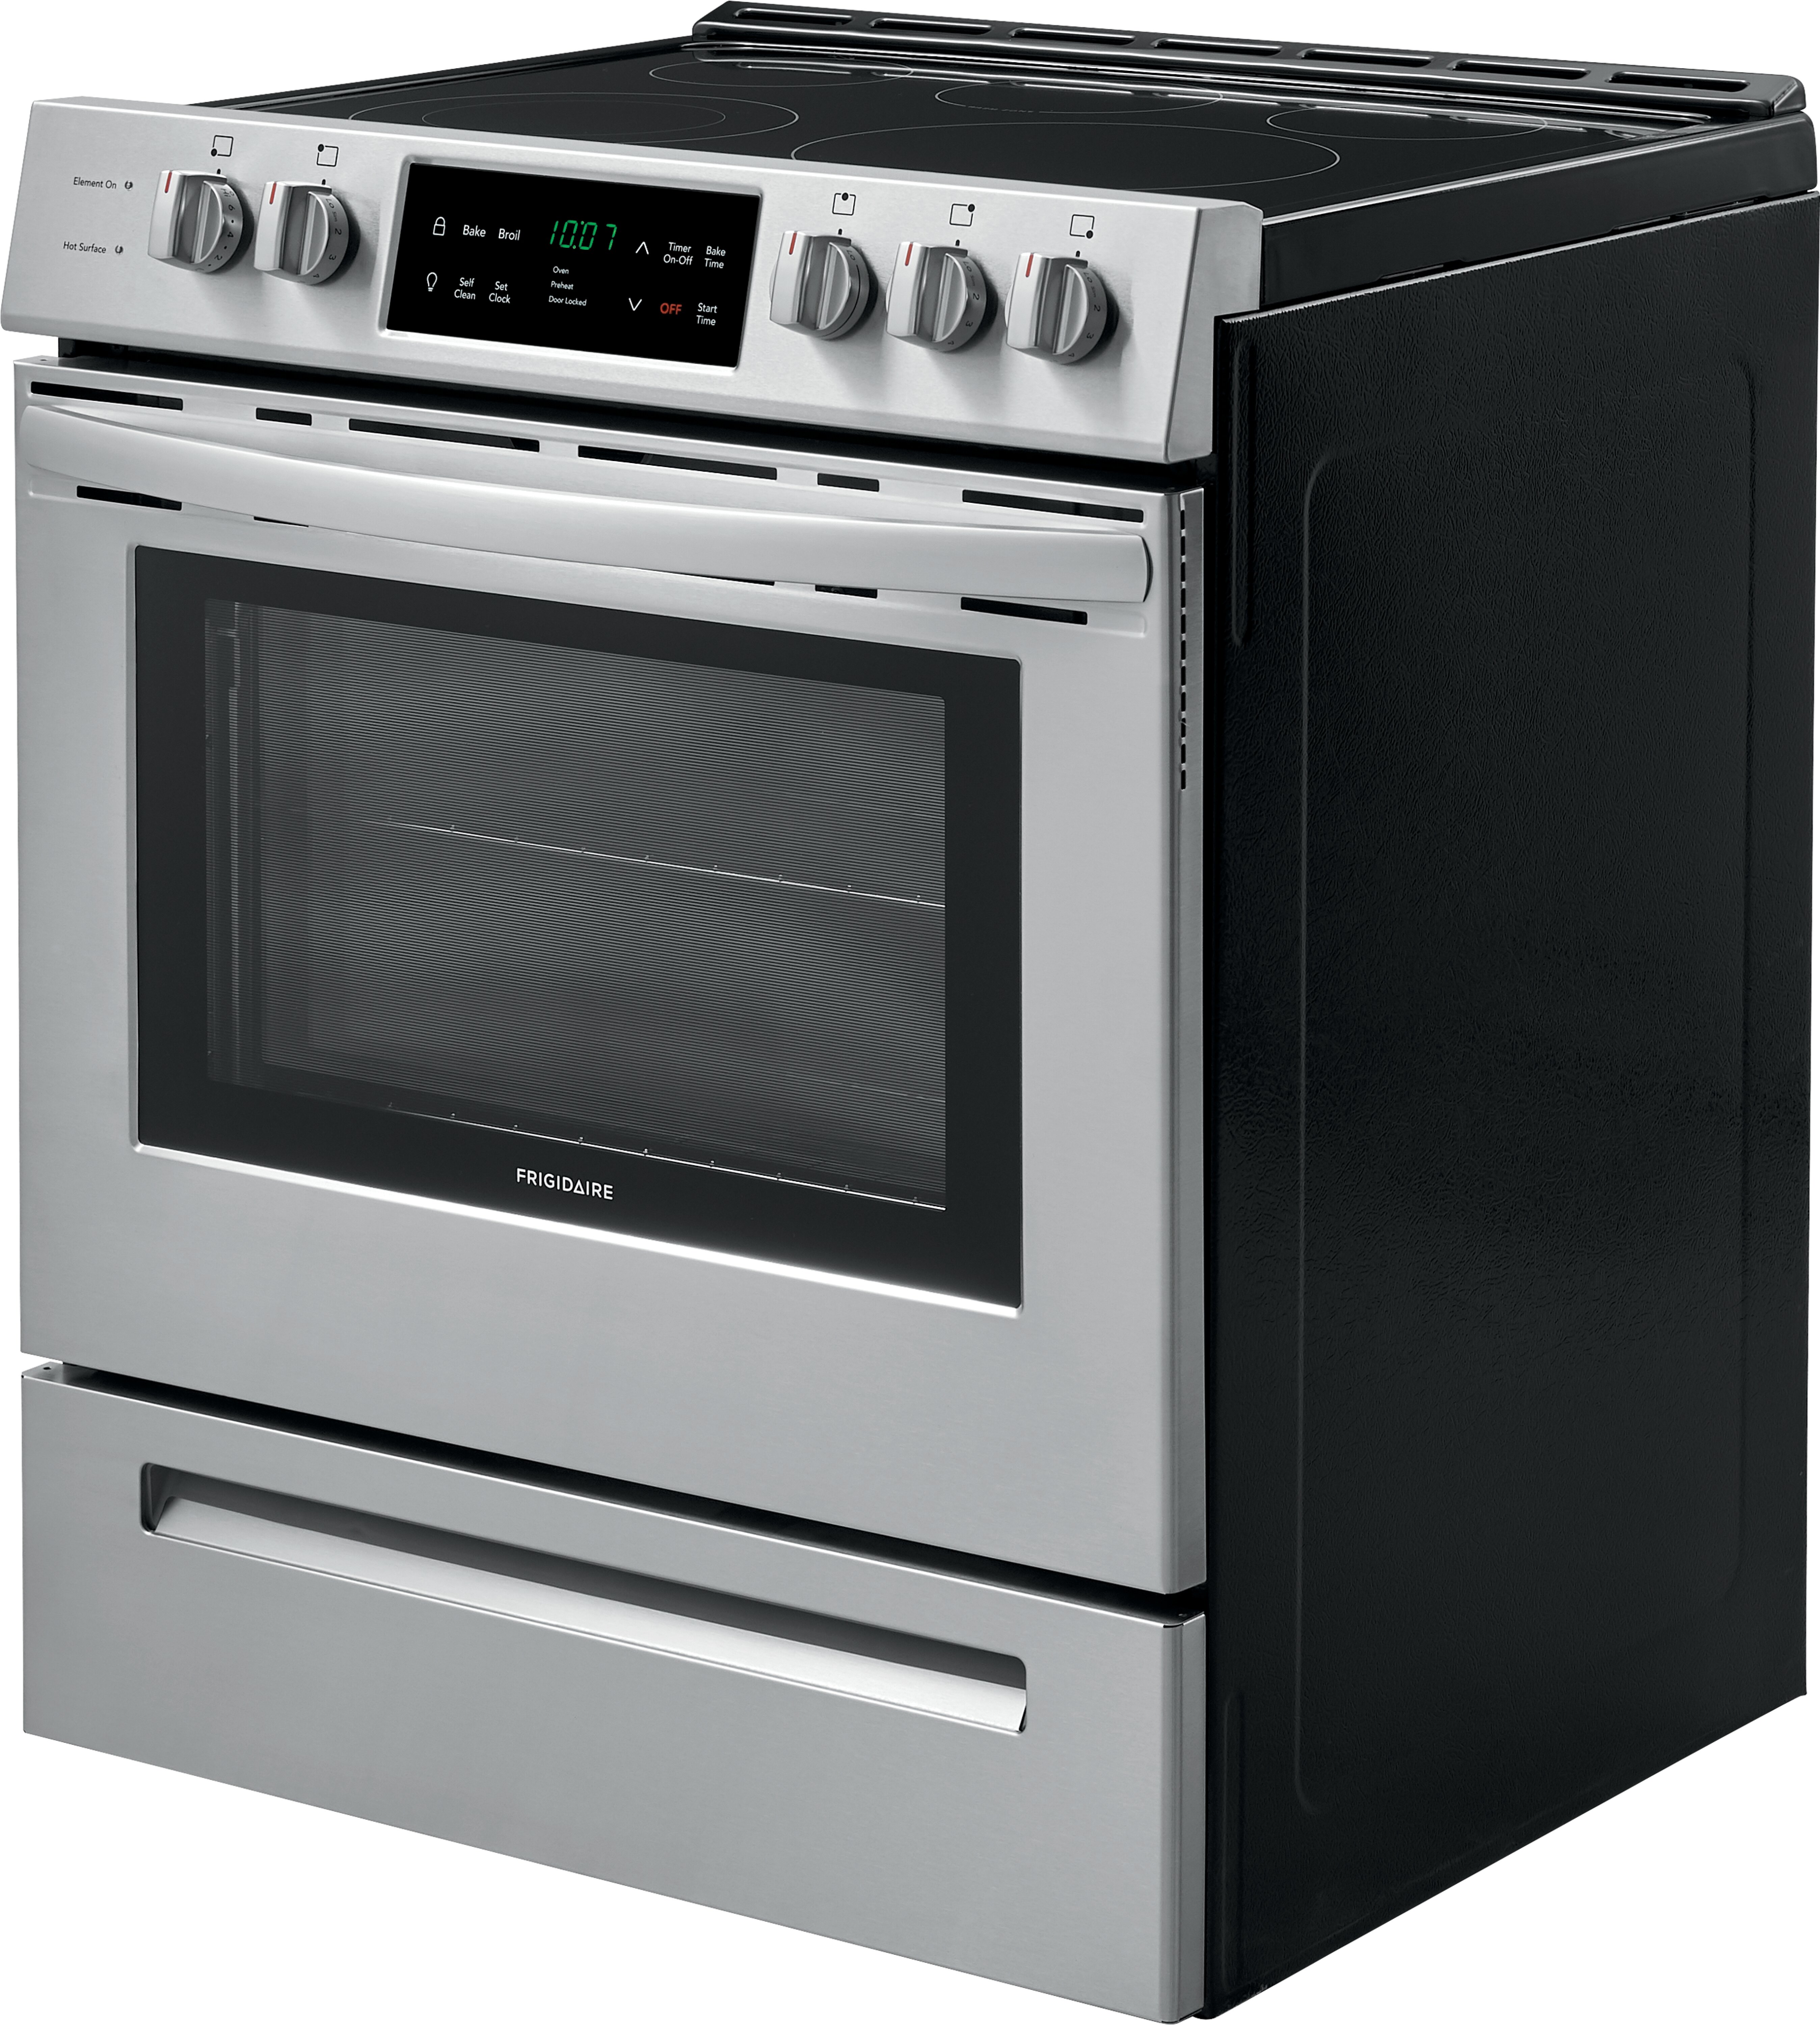 FRIGIDAIRE 30 Electric Stovetop with 4 Element Burners